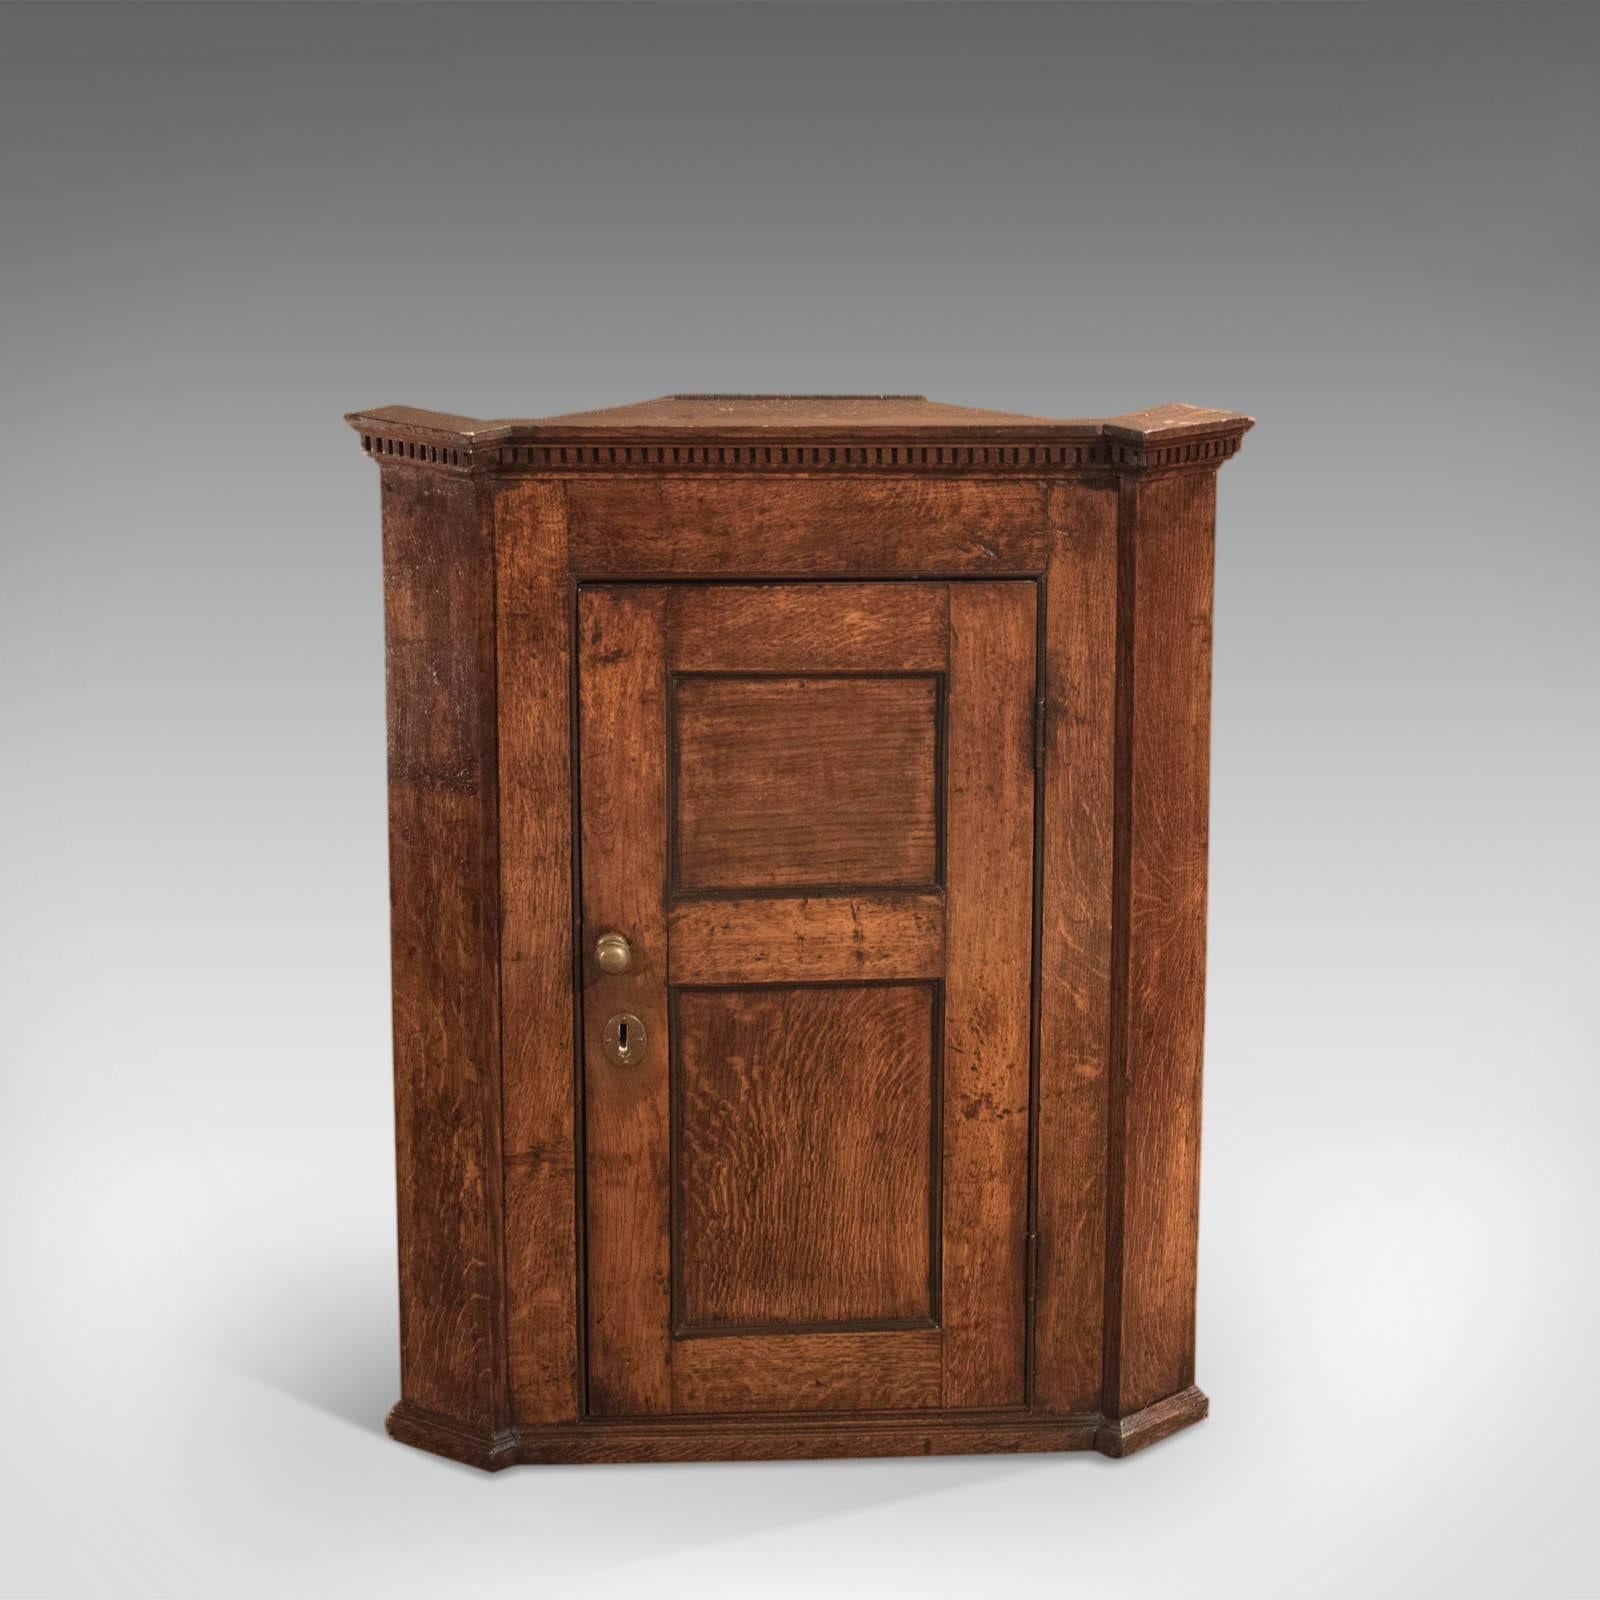 This is an antique, Georgian corner cabinet dating to circa 1750.

A super example of Provincial country furniture from the mid-18th century, this small corner cabinet displays a delicious warm patina and good graining in the English oak